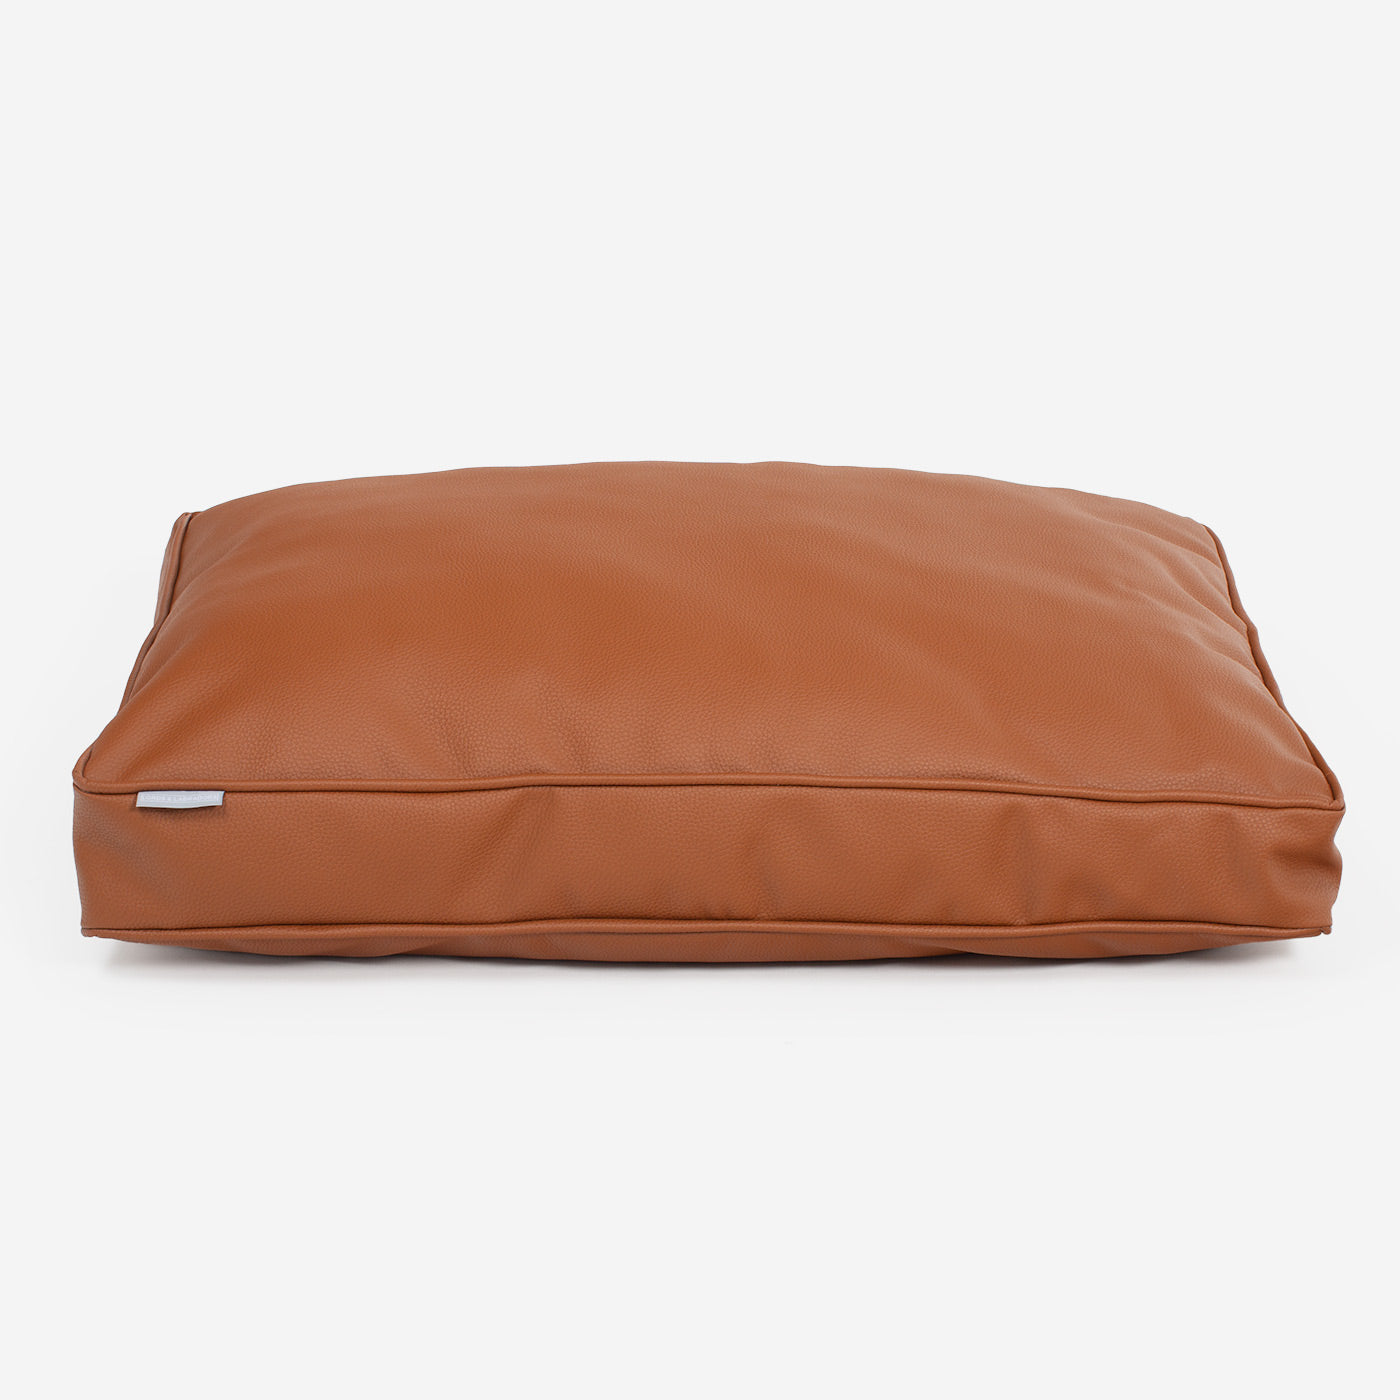 [color:ember] Luxury Dog Cushion in Rhino Tough Desert Faux Leather in Ember. The Perfect Pet Bed Time Accessory! Available Now at Lords & Labradors US